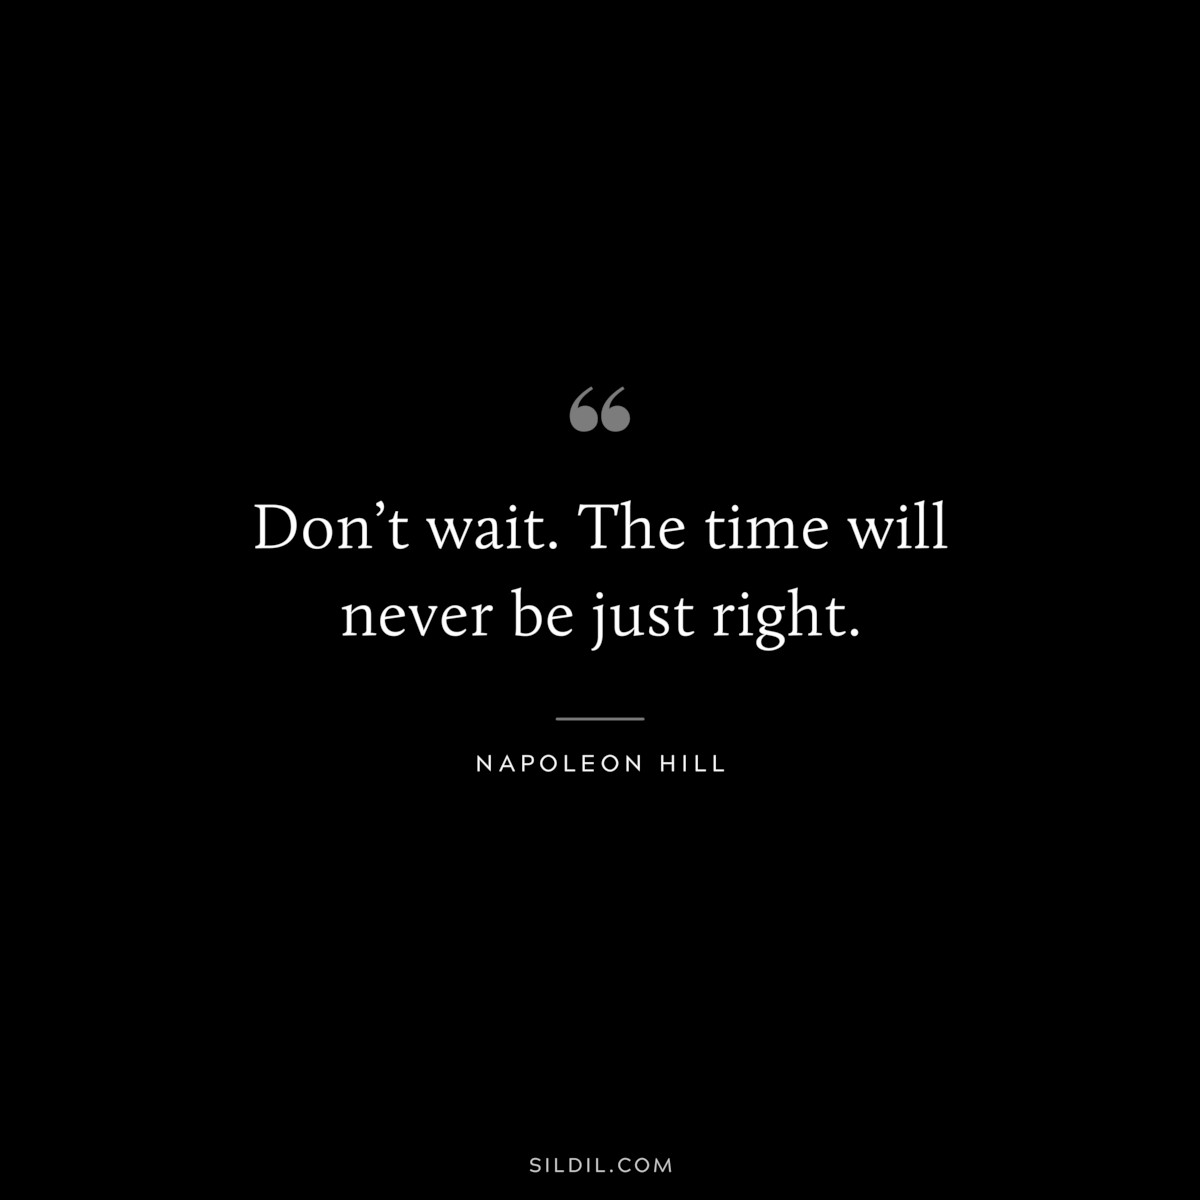 Don’t wait. The time will never be just right. ― Napoleon Hill